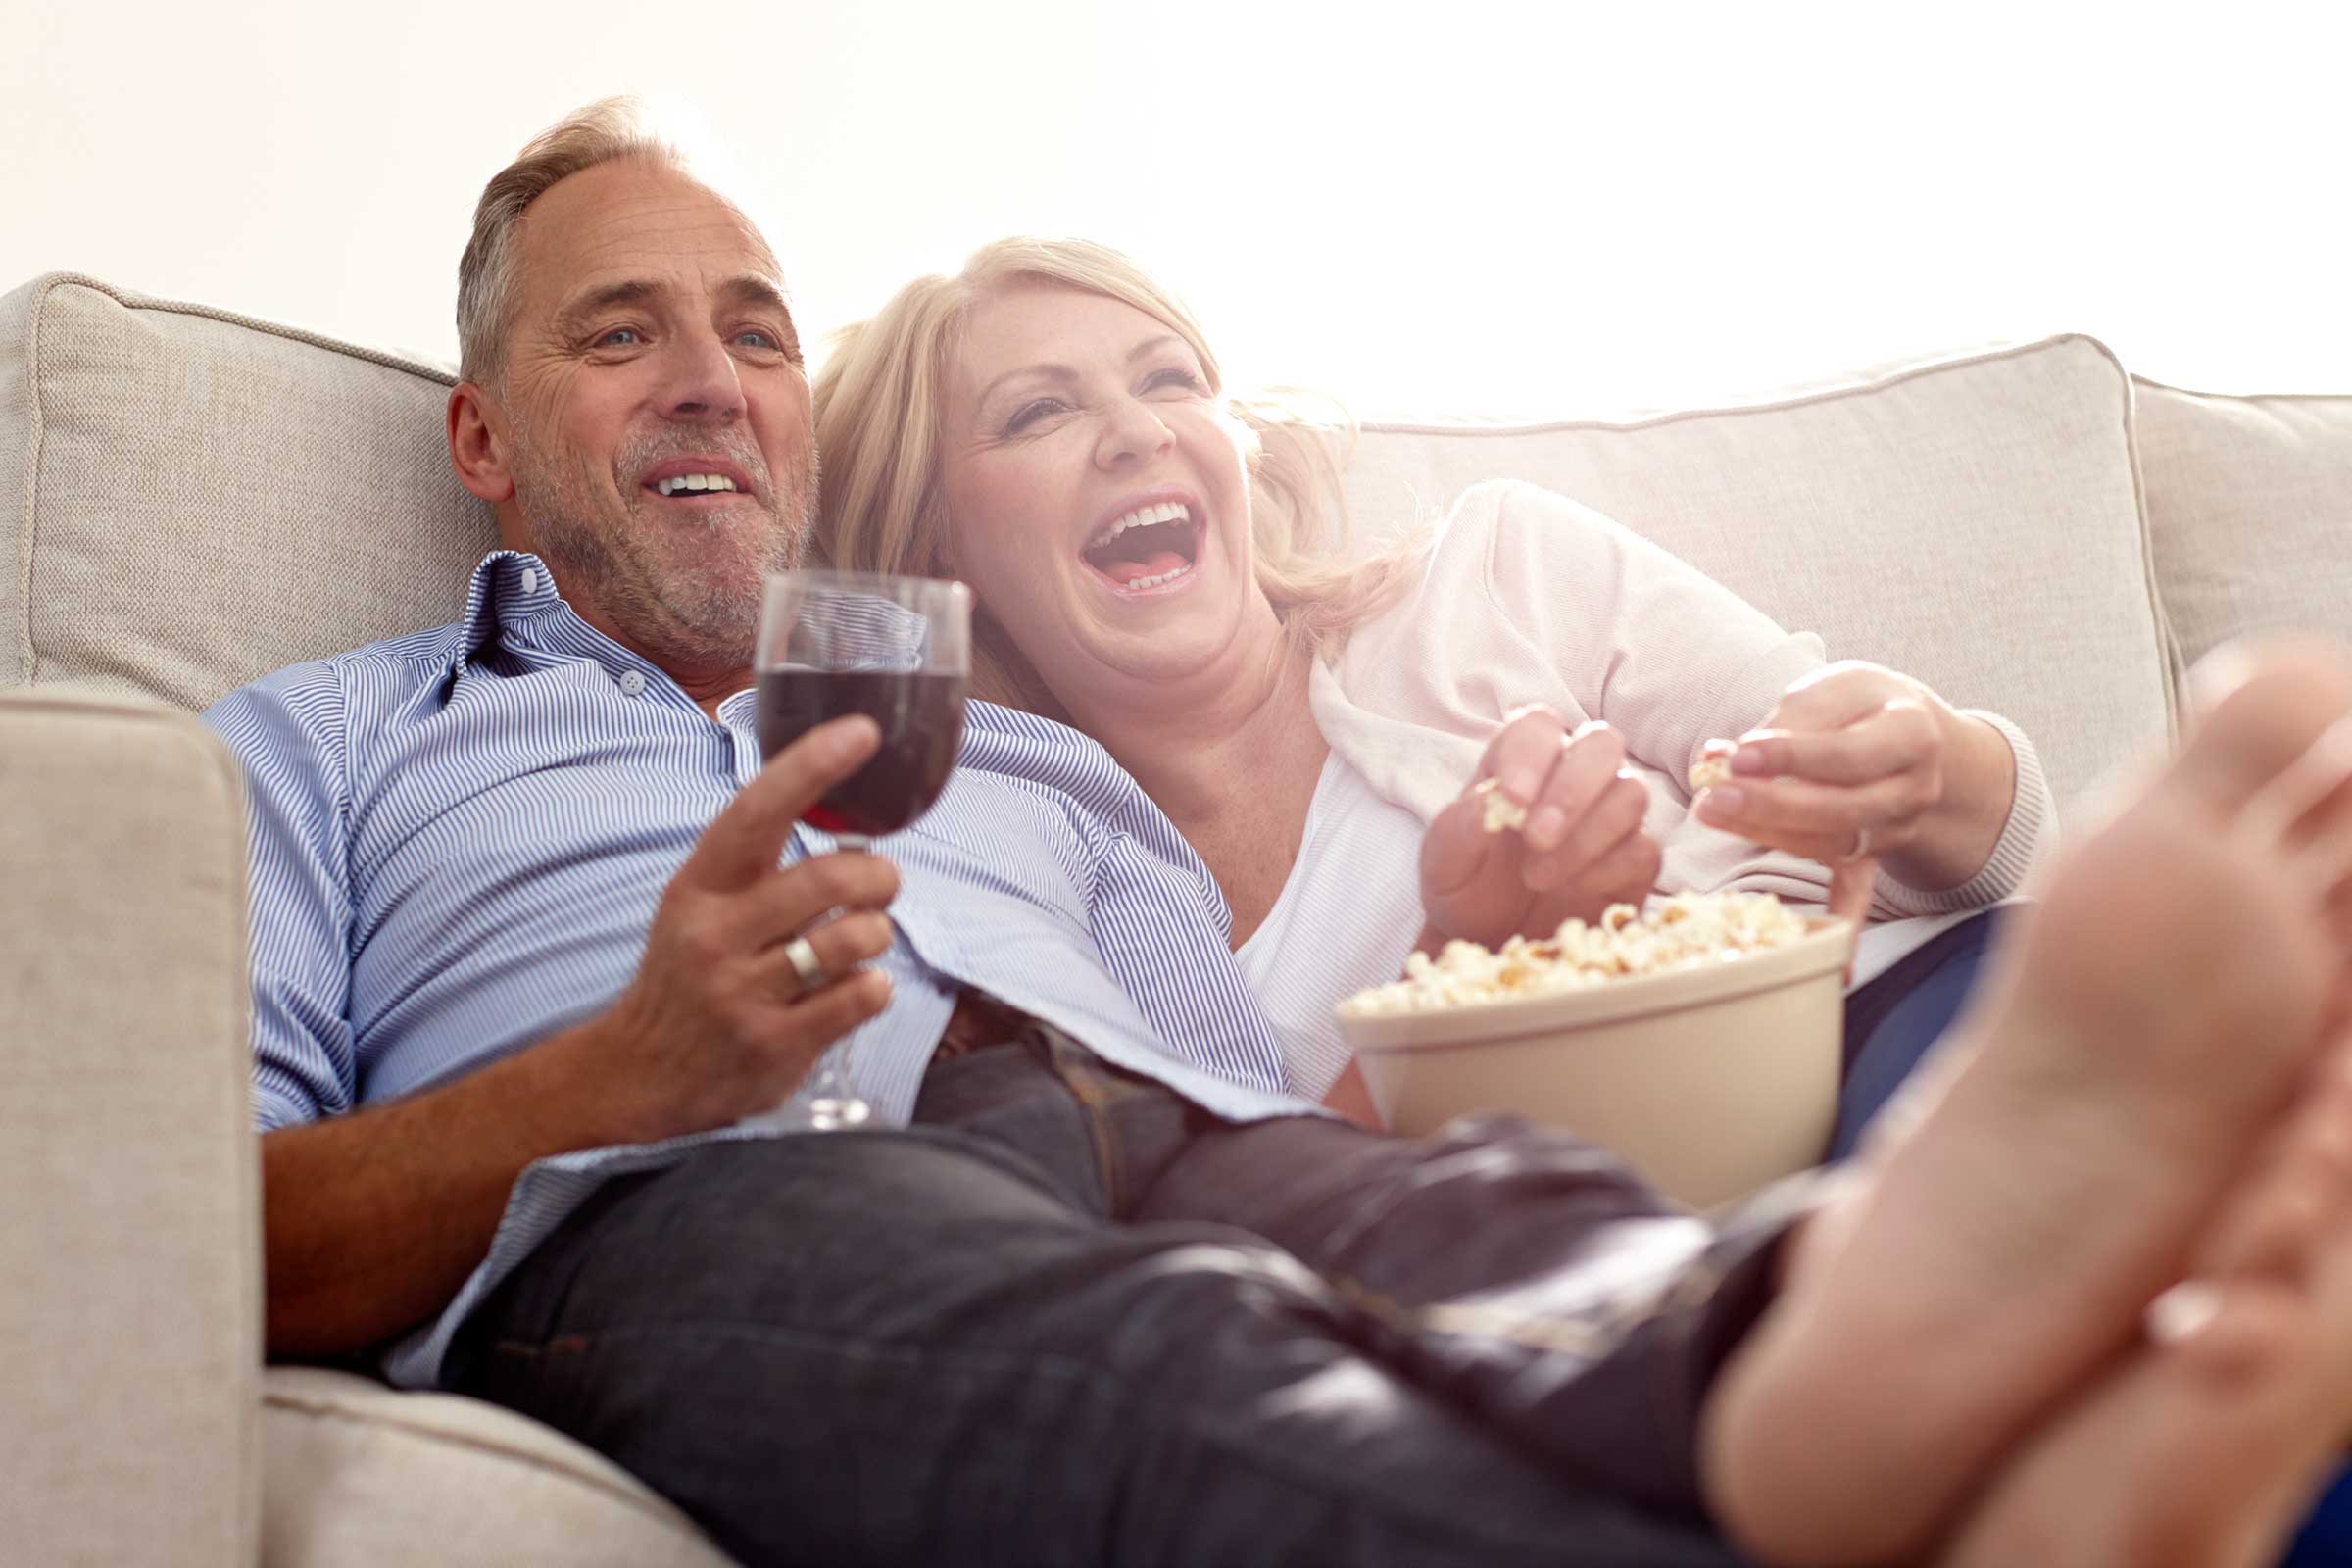 Which Sitcom Are You? 59 year old watching tv